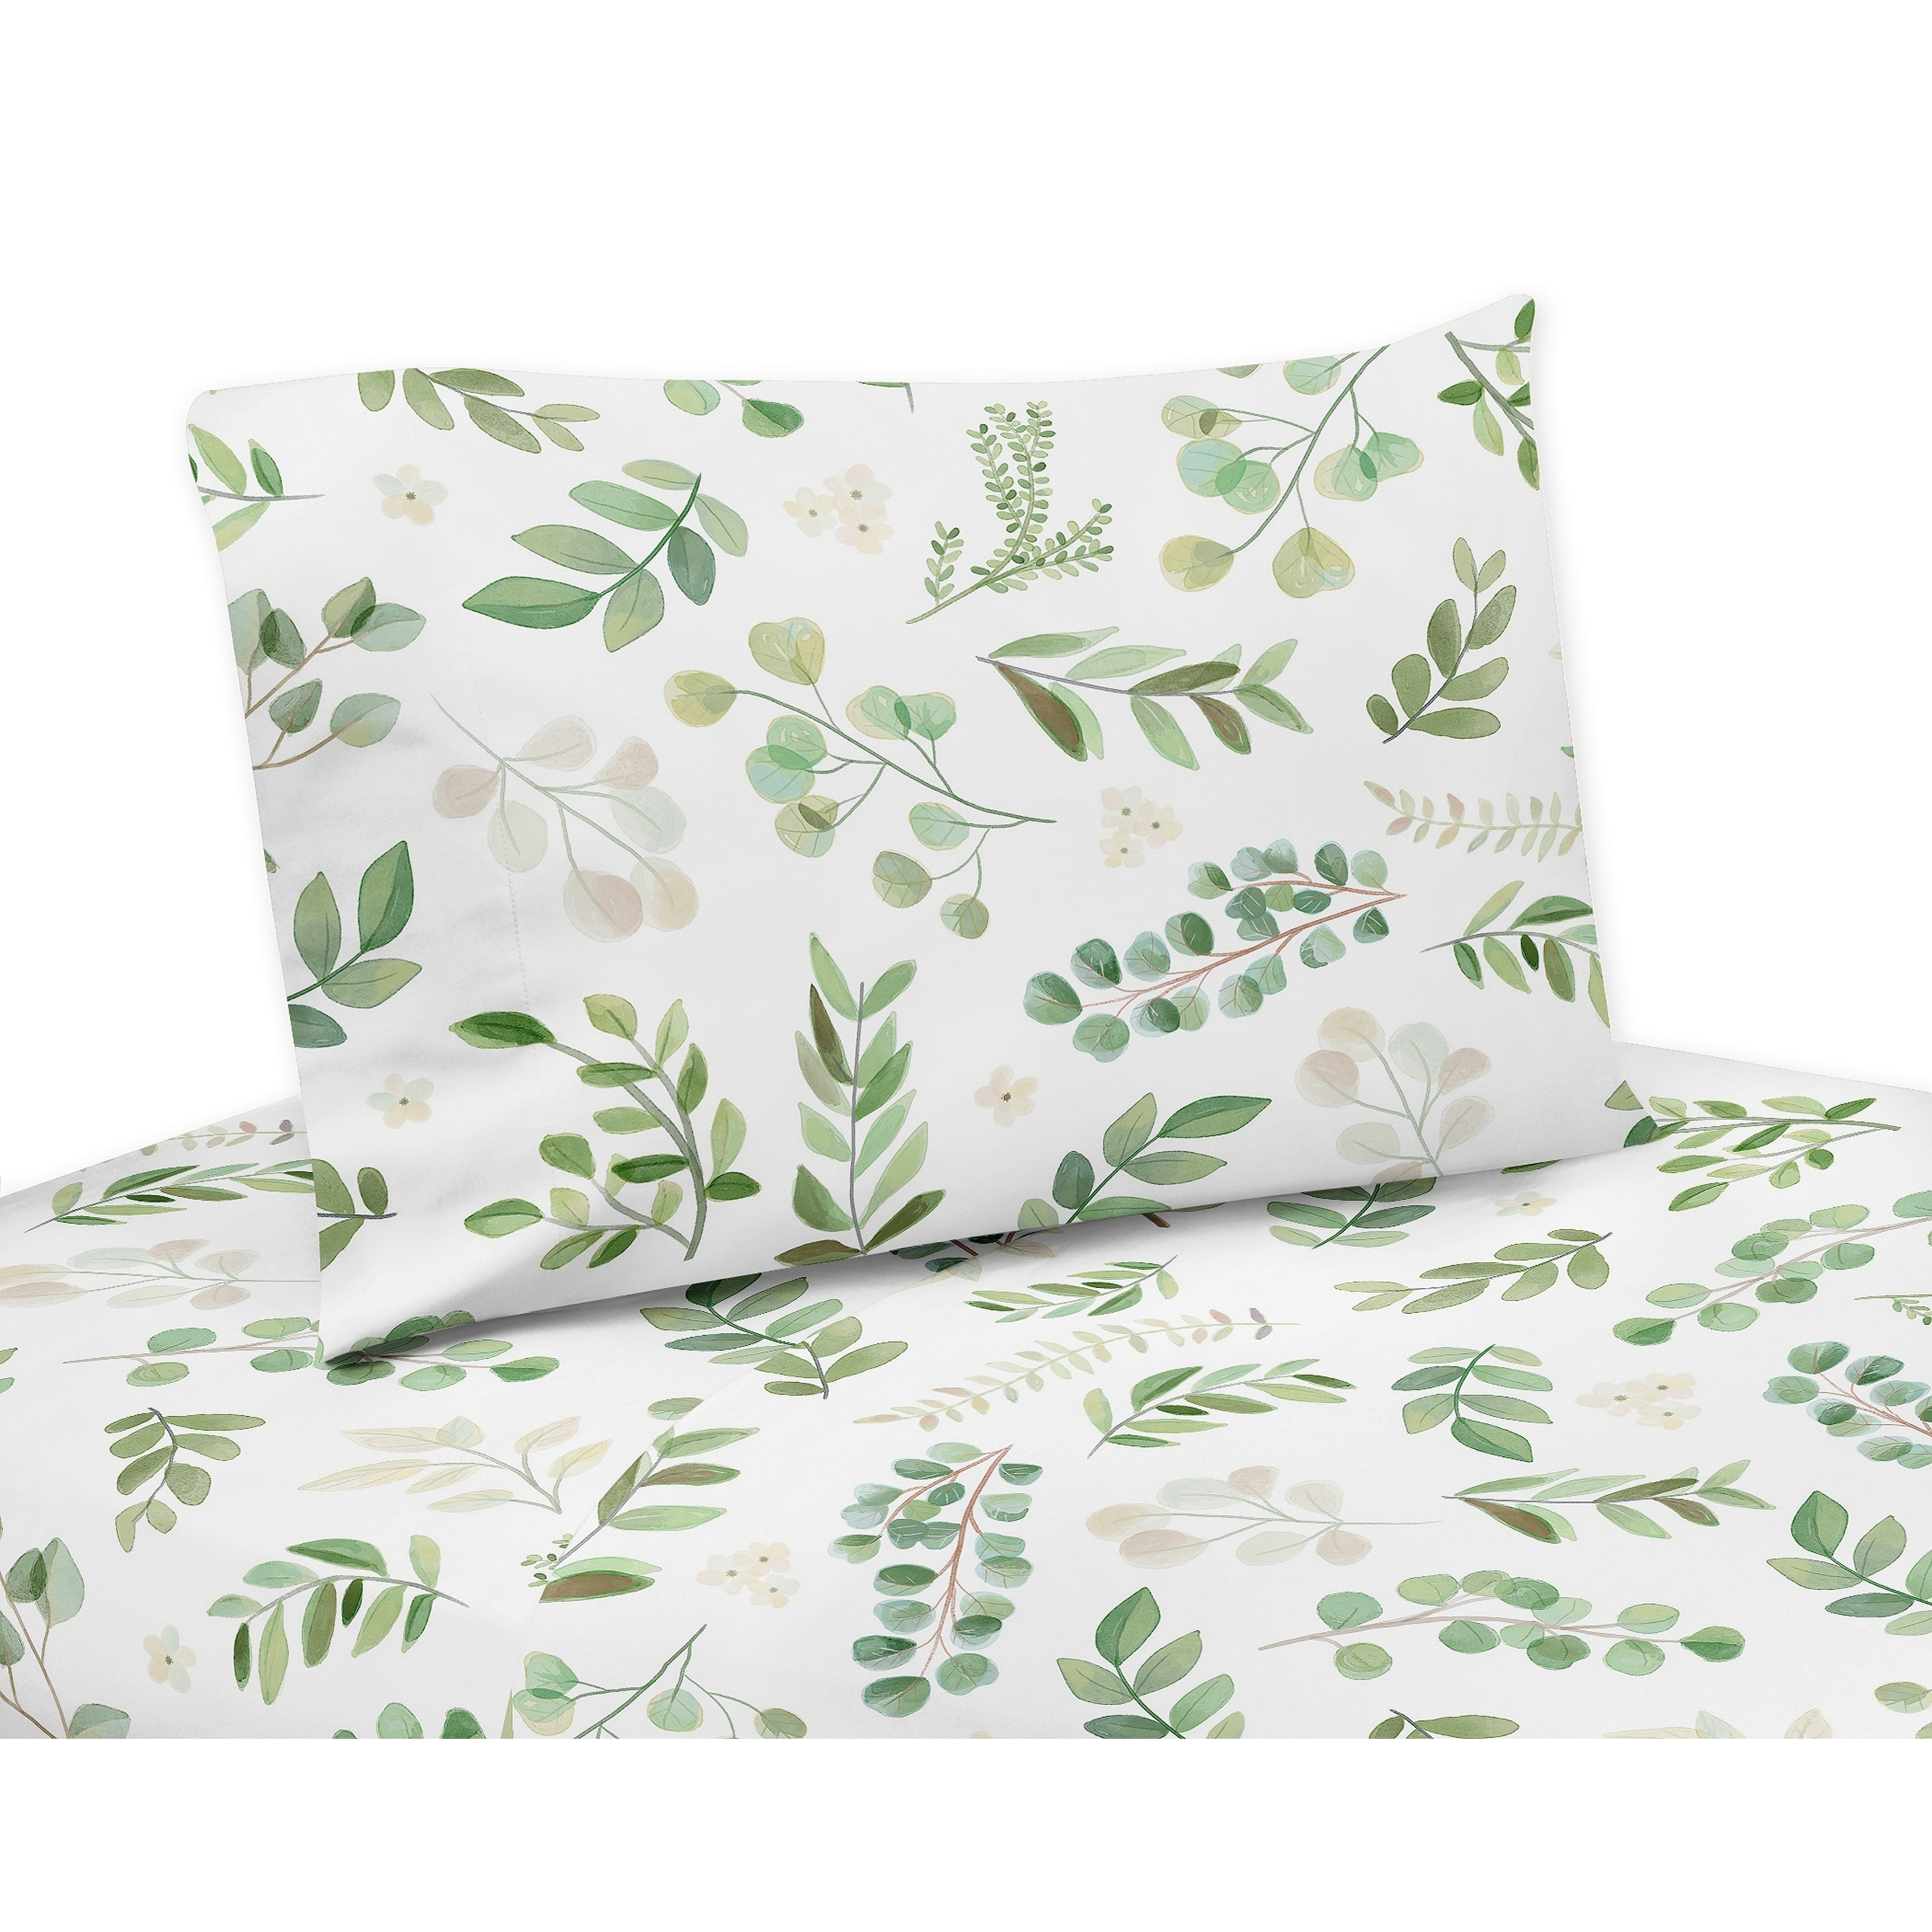 Floral Leaf Collection 3-piece Twin Sheet Set Green and White Boho  Watercolor Botanical Woodland Tropical Garden Bed Bath  Beyond 32008299